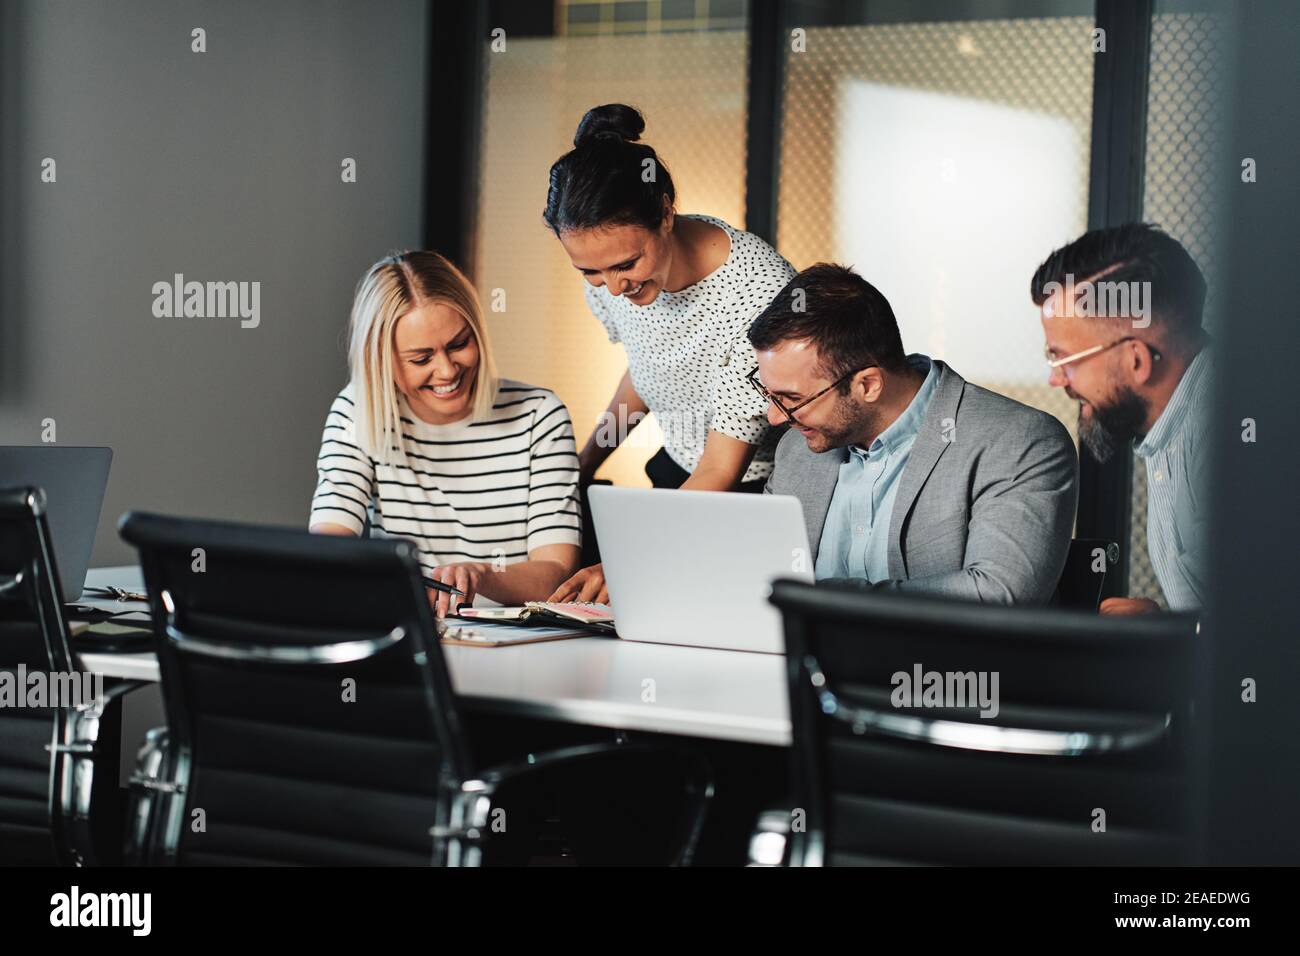 Laughing group of businesspeople working together on a laptop and discussing paperwork at a table during a boardroom meeting Stock Photo